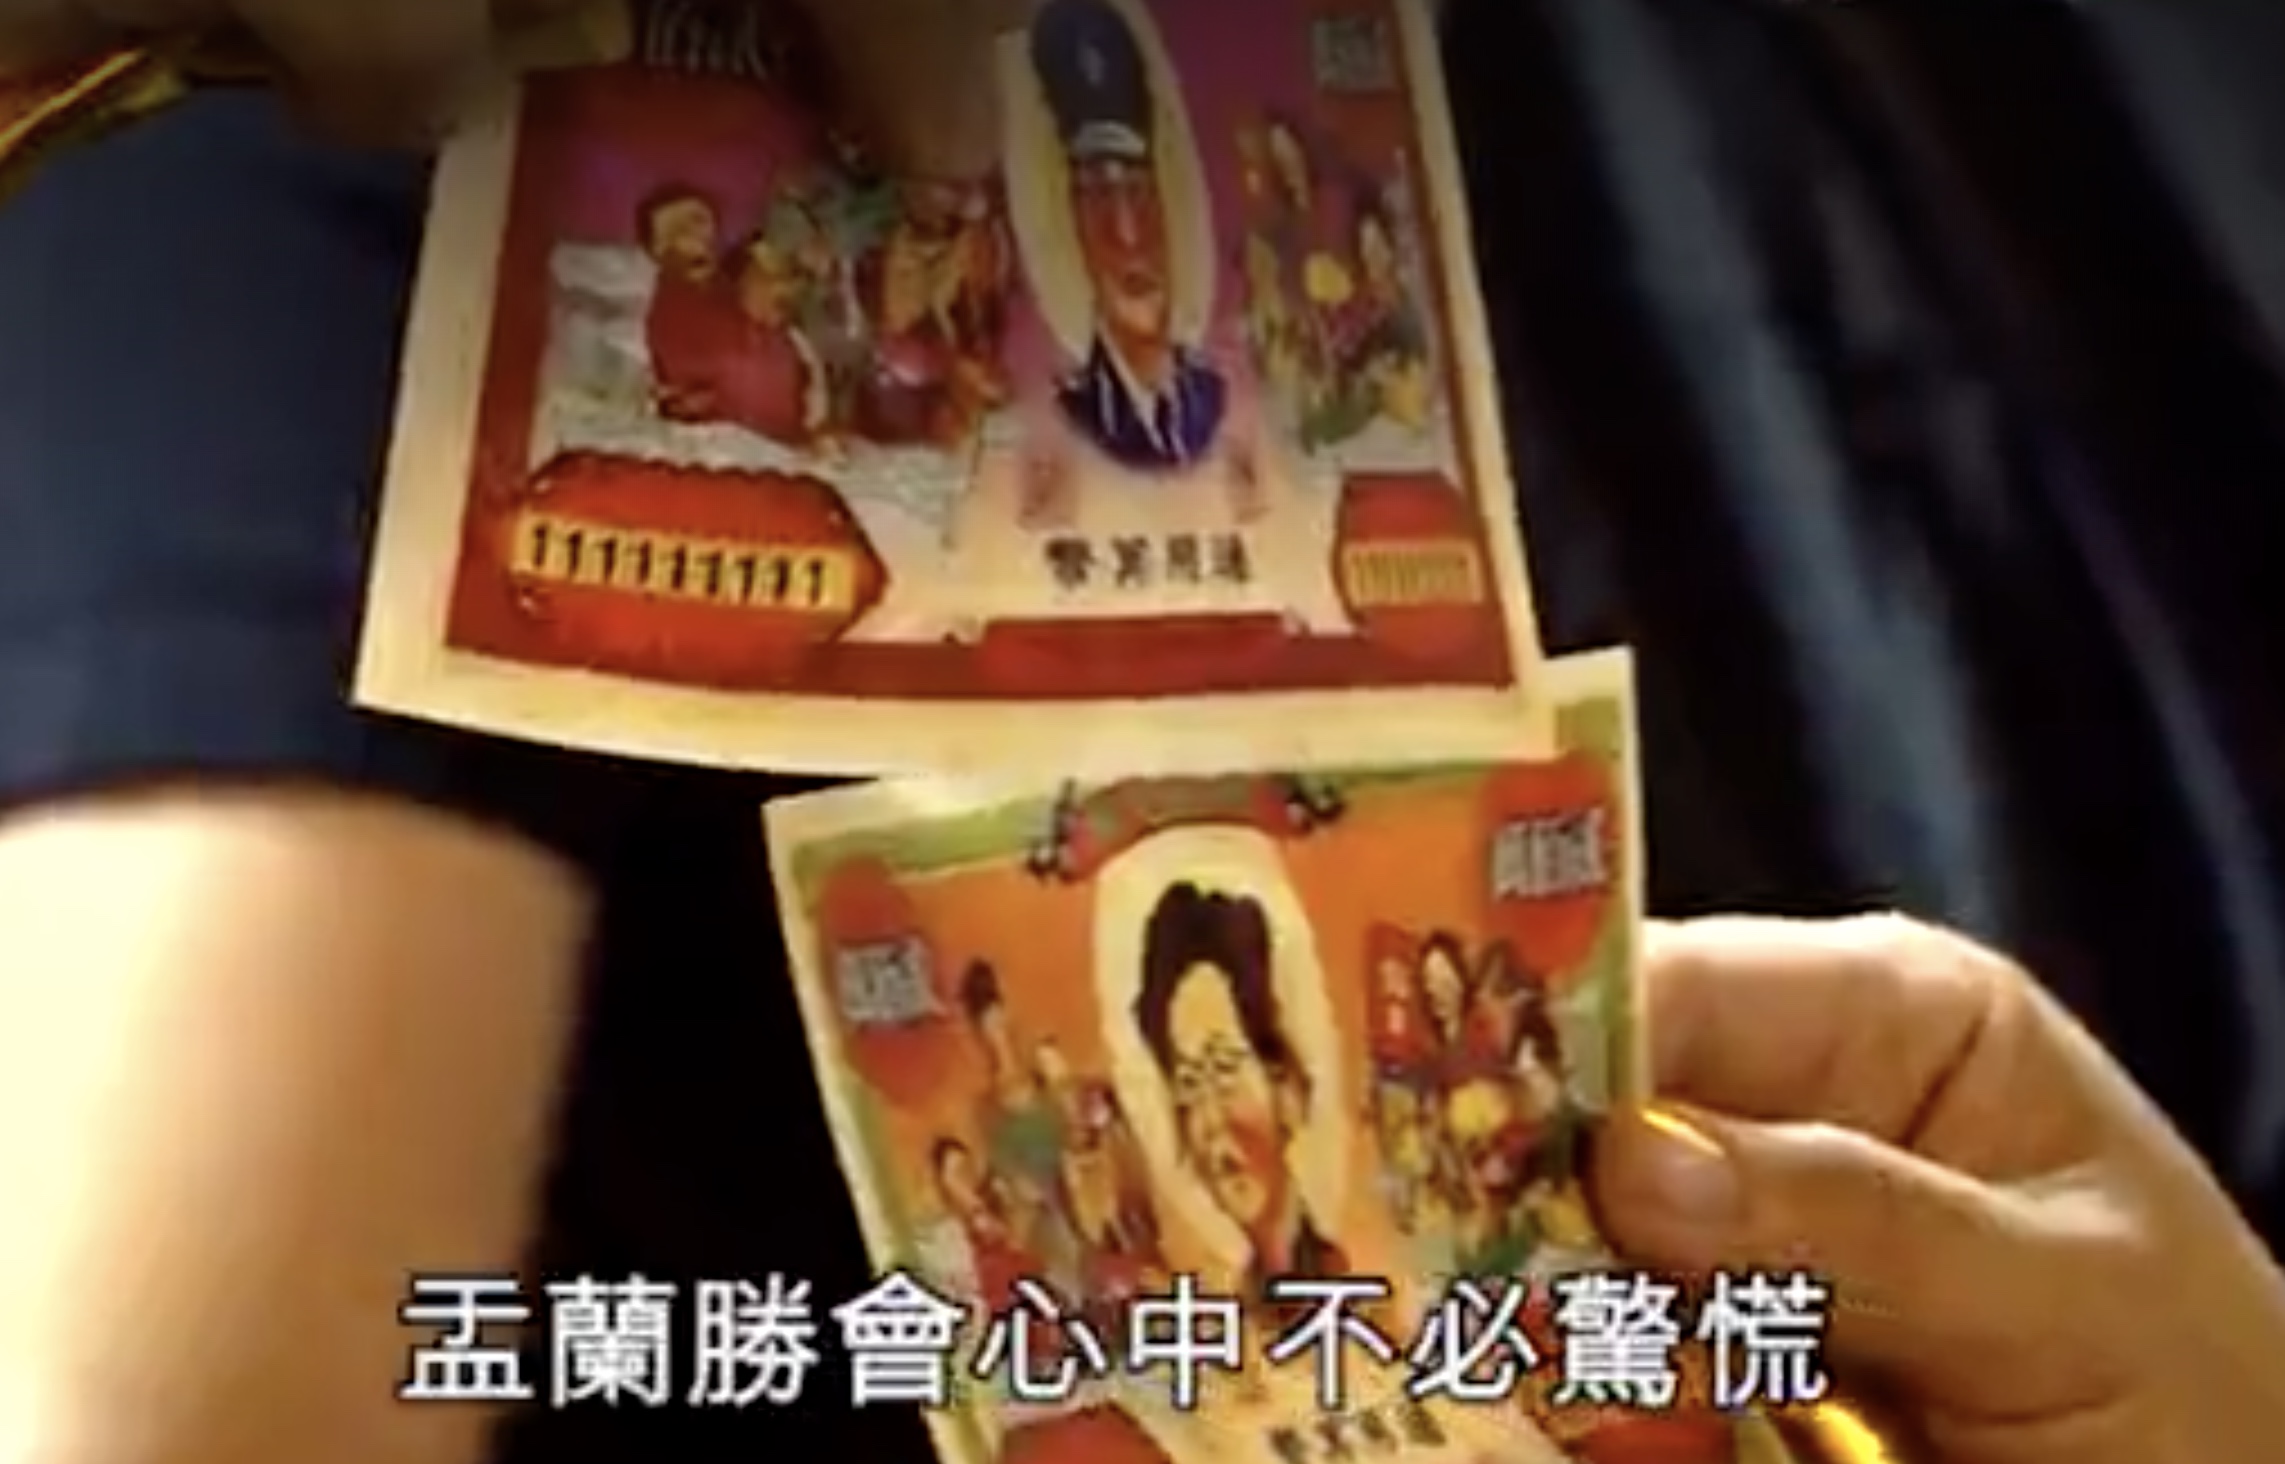 So-called “ghost money” featuring the faces of CE Carrie Lam and Police Chief Stephen Lo. Screengrab via Apple Daily video.